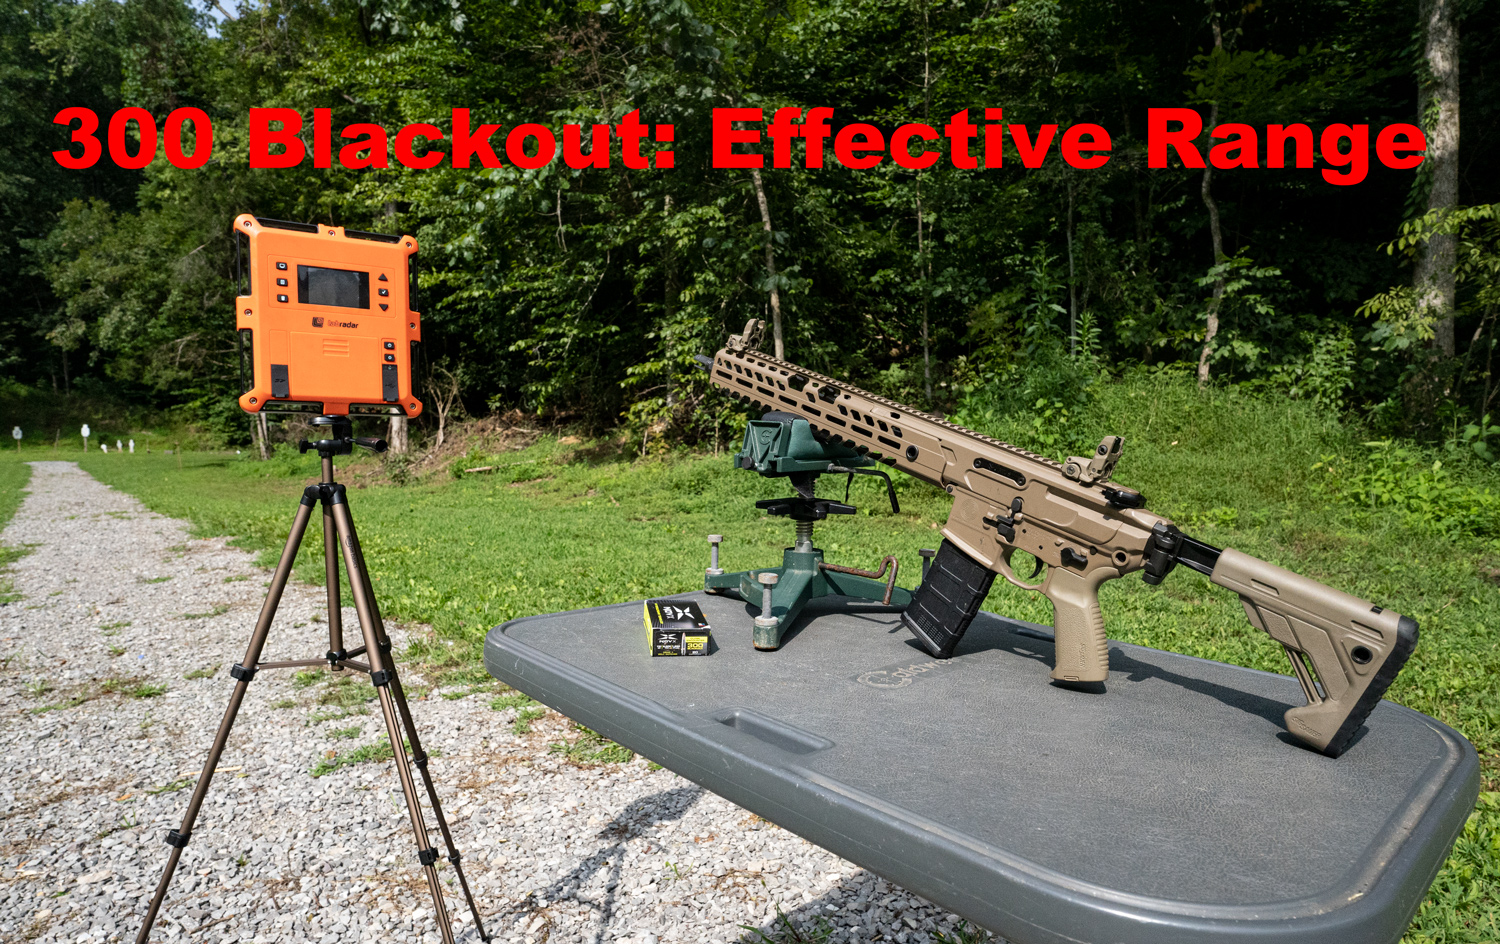 300 blackout effective range with rifle and chronograph at the range